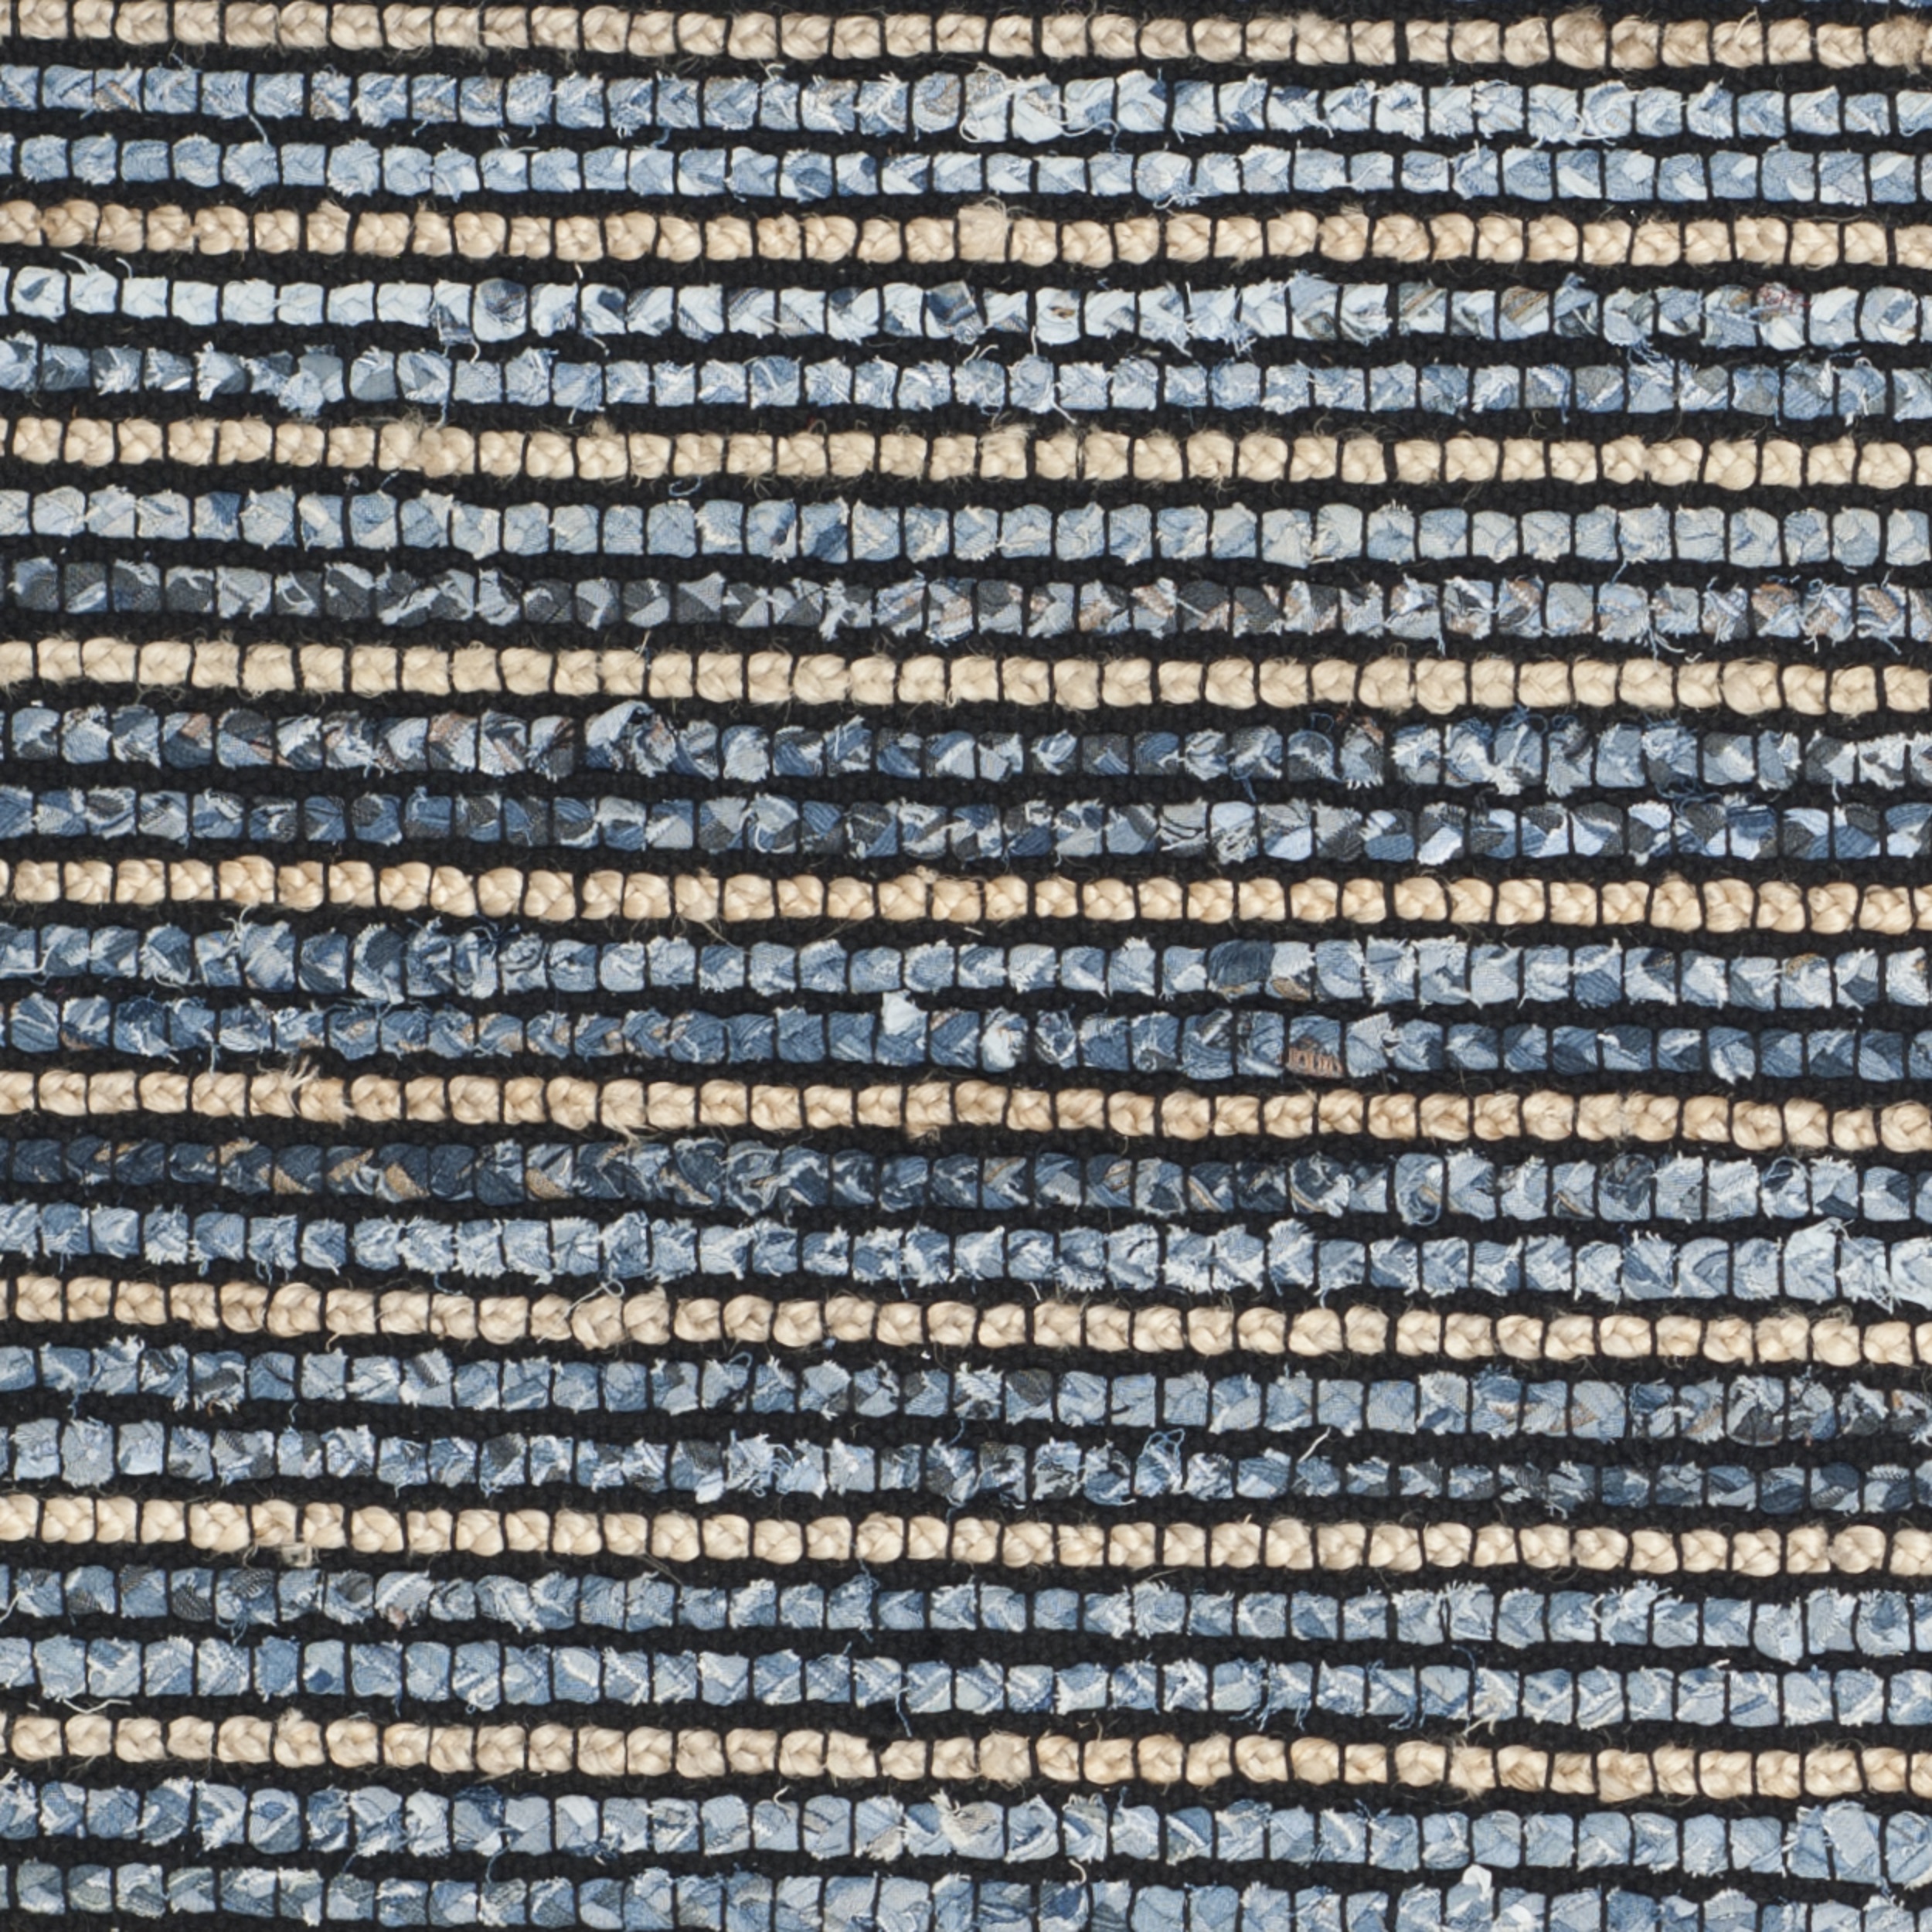 SAFAVIEH Cape Cod Signe Braided Striped Area Rug, 2'3" x 6', Blue/Natural - image 5 of 6